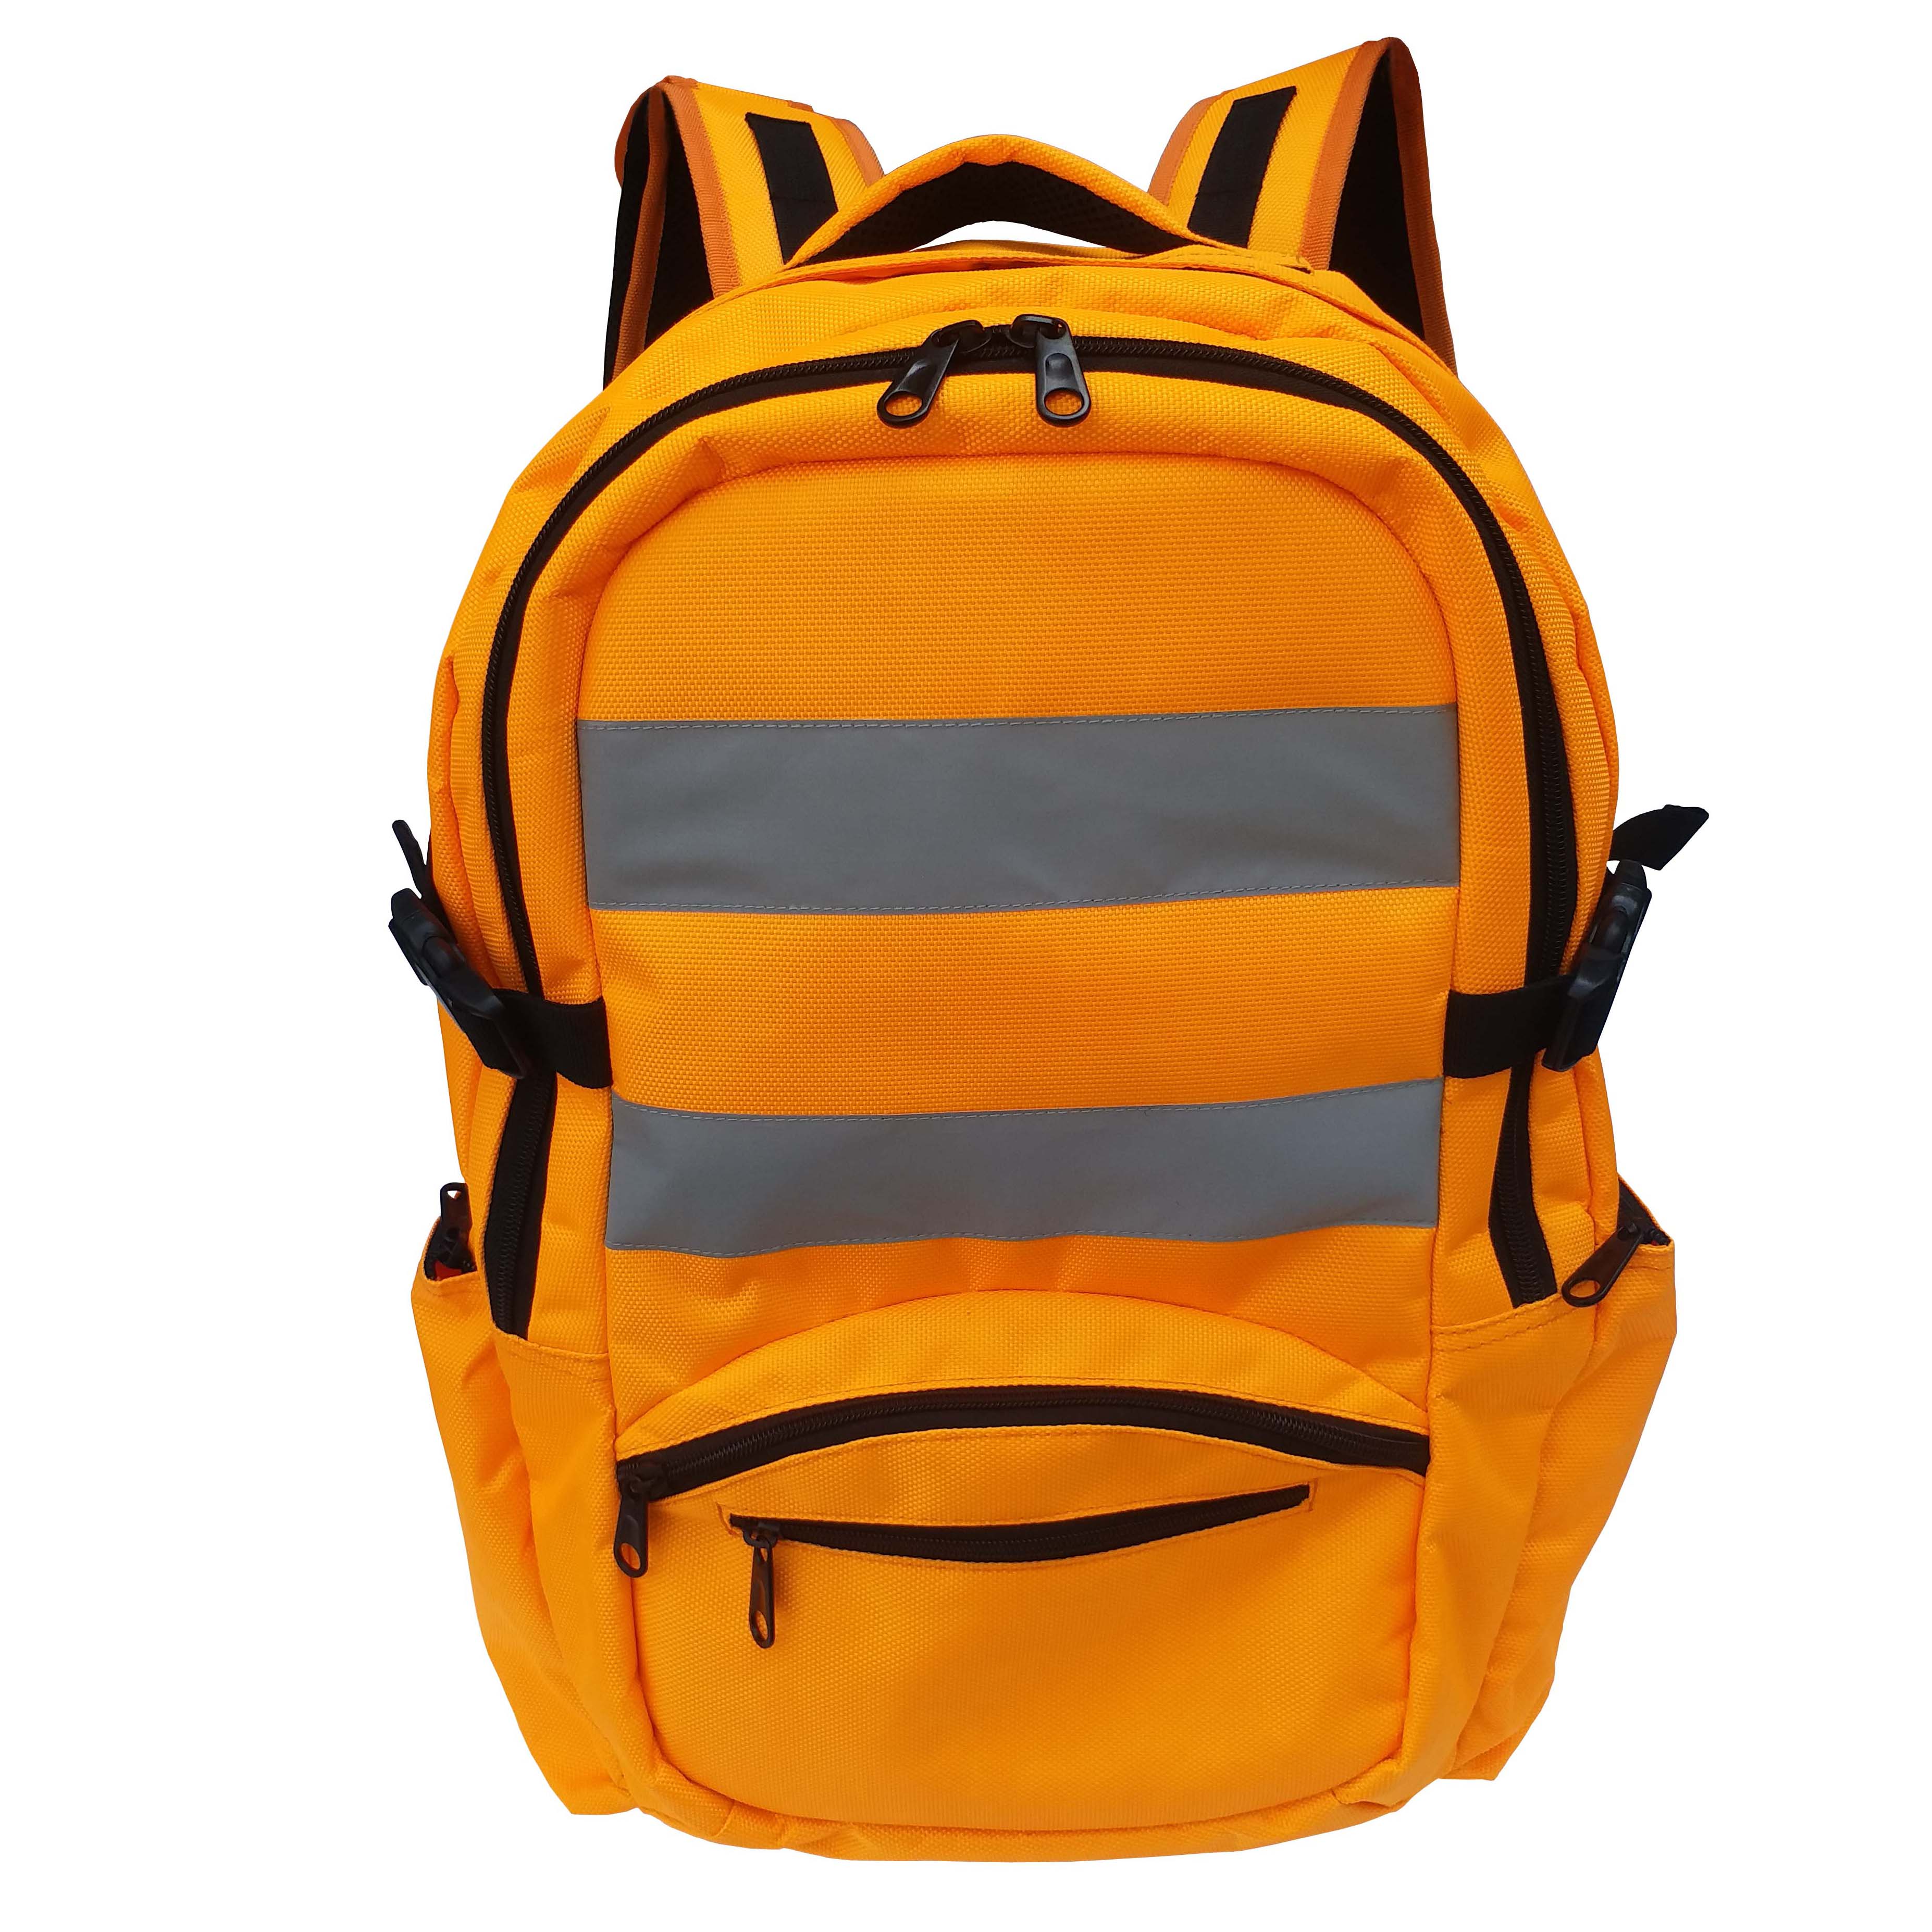  Professional Durable Customize High Visibility Reflective Tape Safety Fireman Backpack